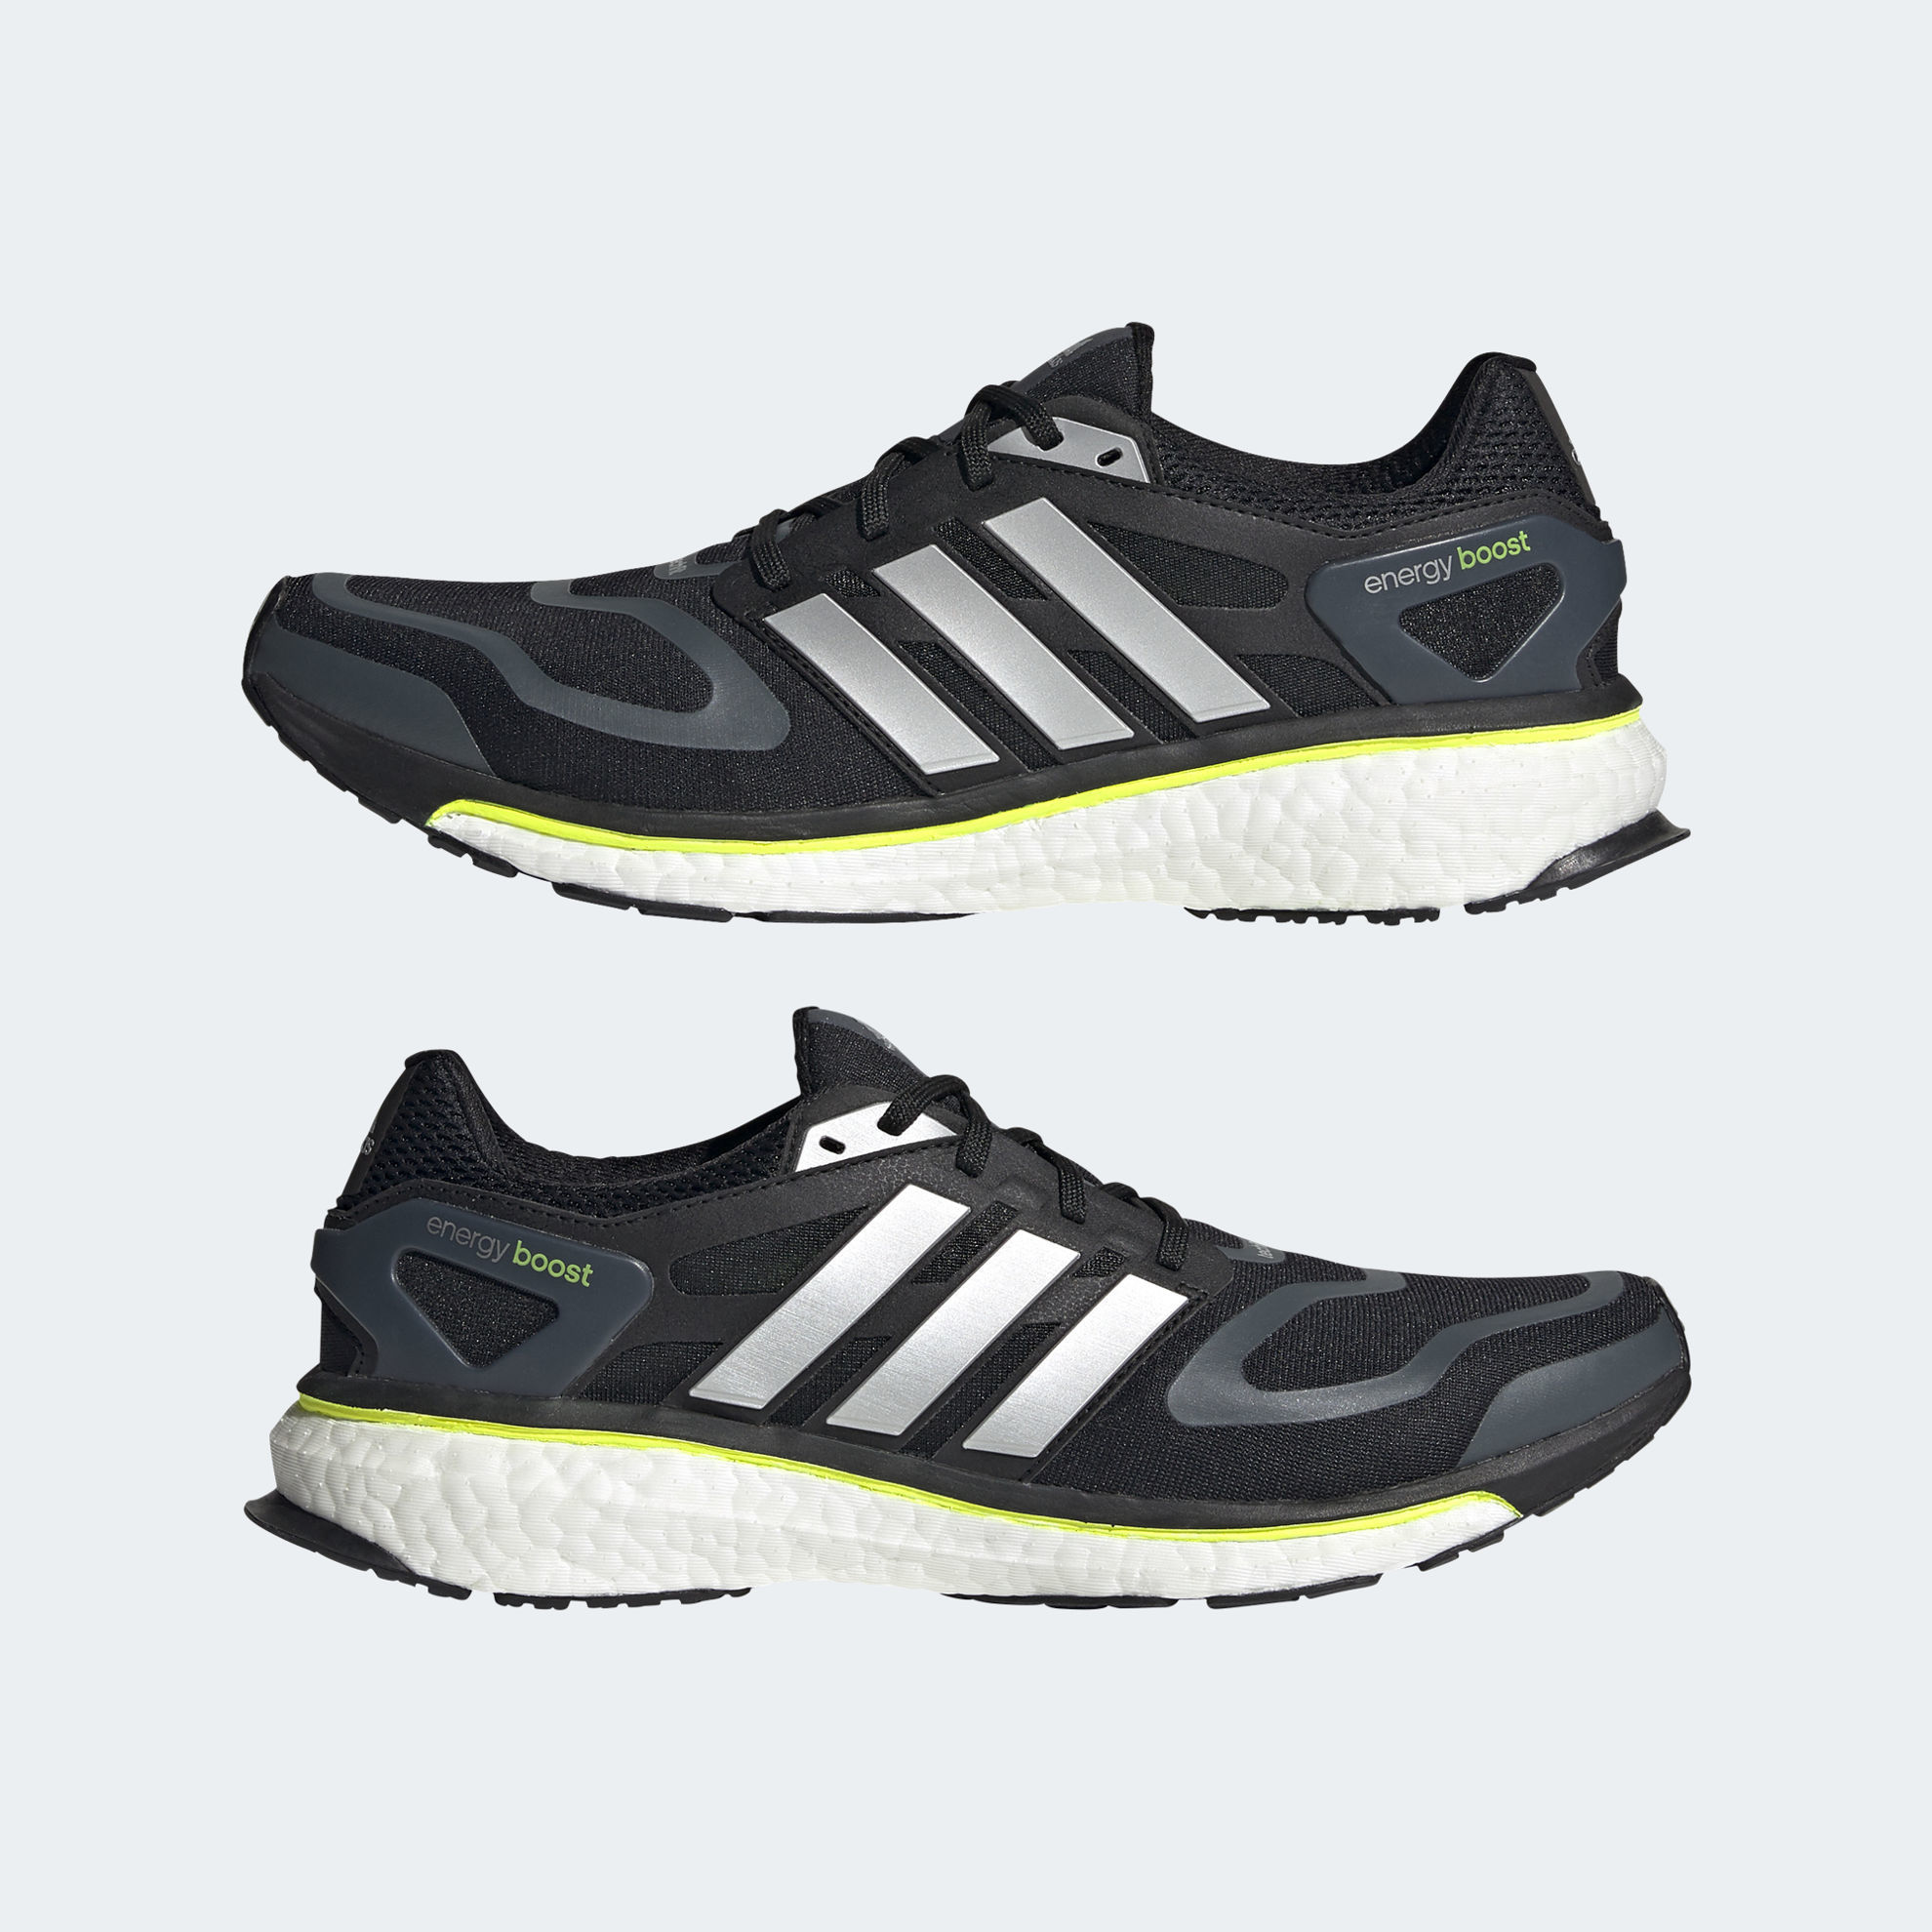 adidas power boost shoes